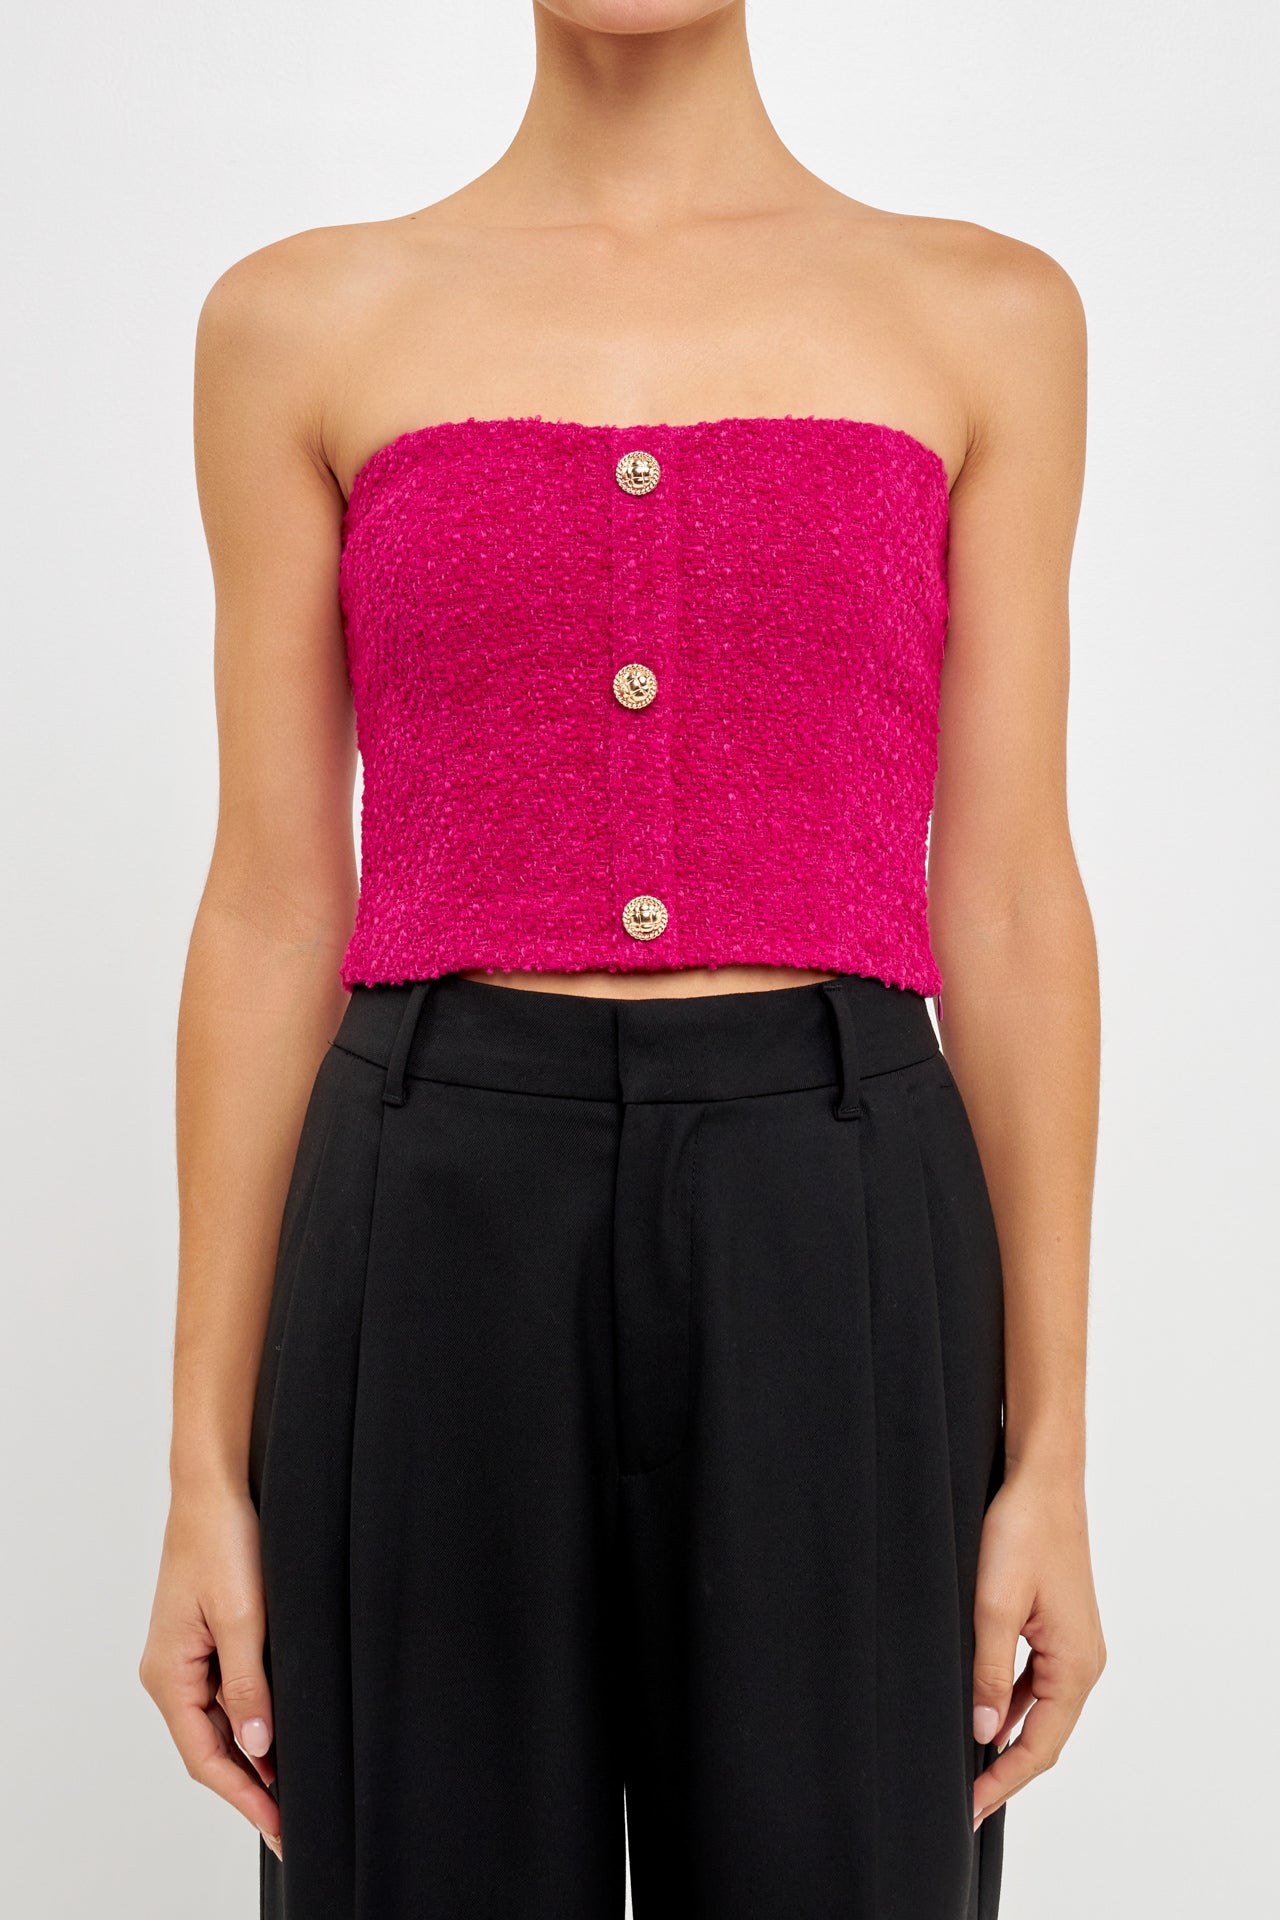 Endless Rose - Boucle Crop Top - Tops in Women's Clothing available at endlessrose.com